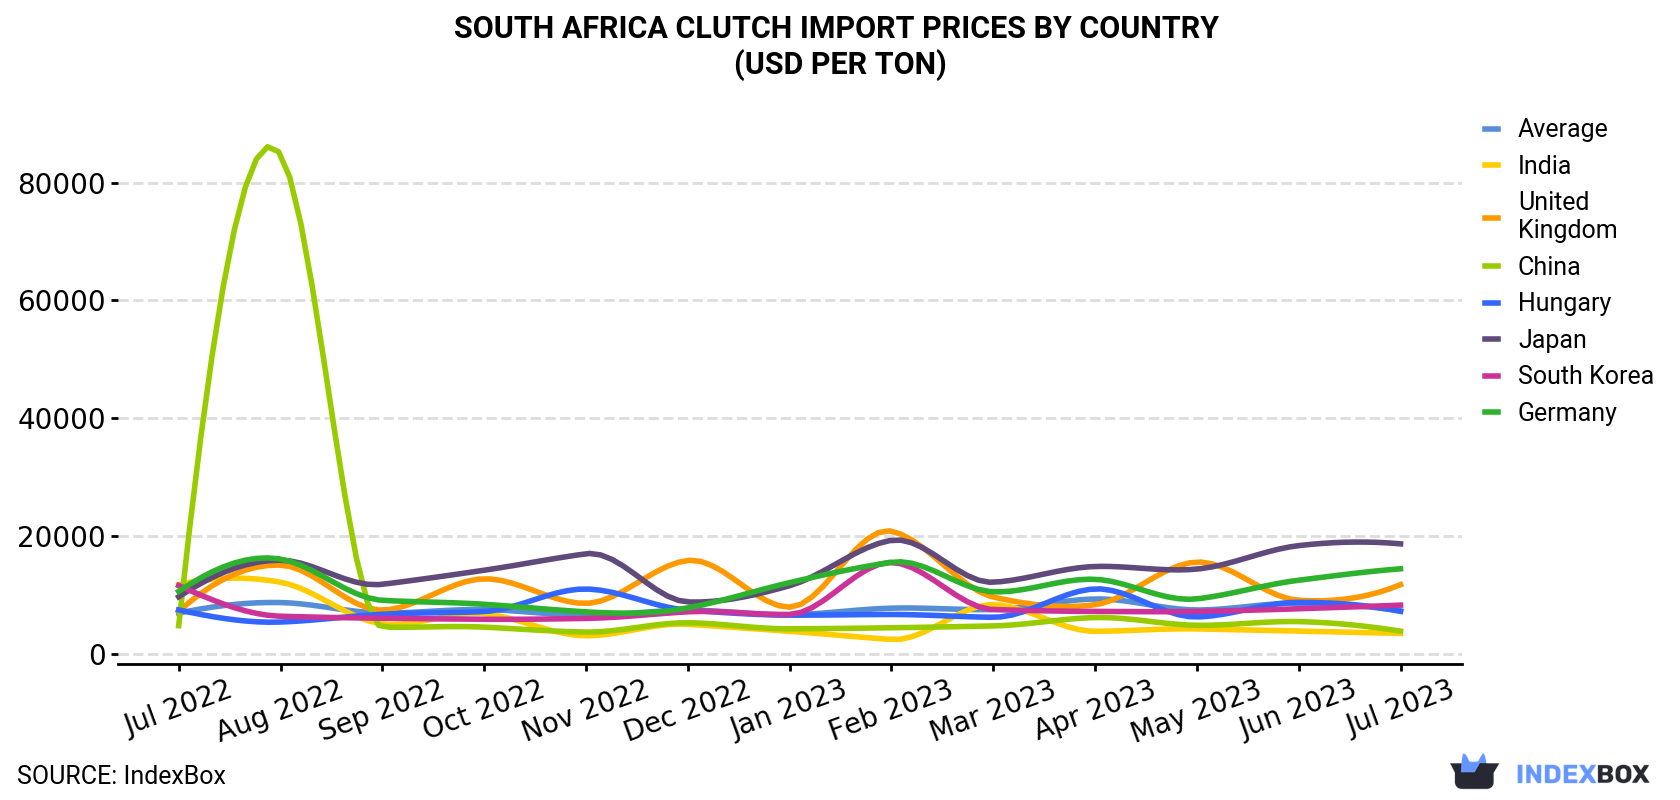 South Africa Clutch Import Prices By Country (USD Per Ton)